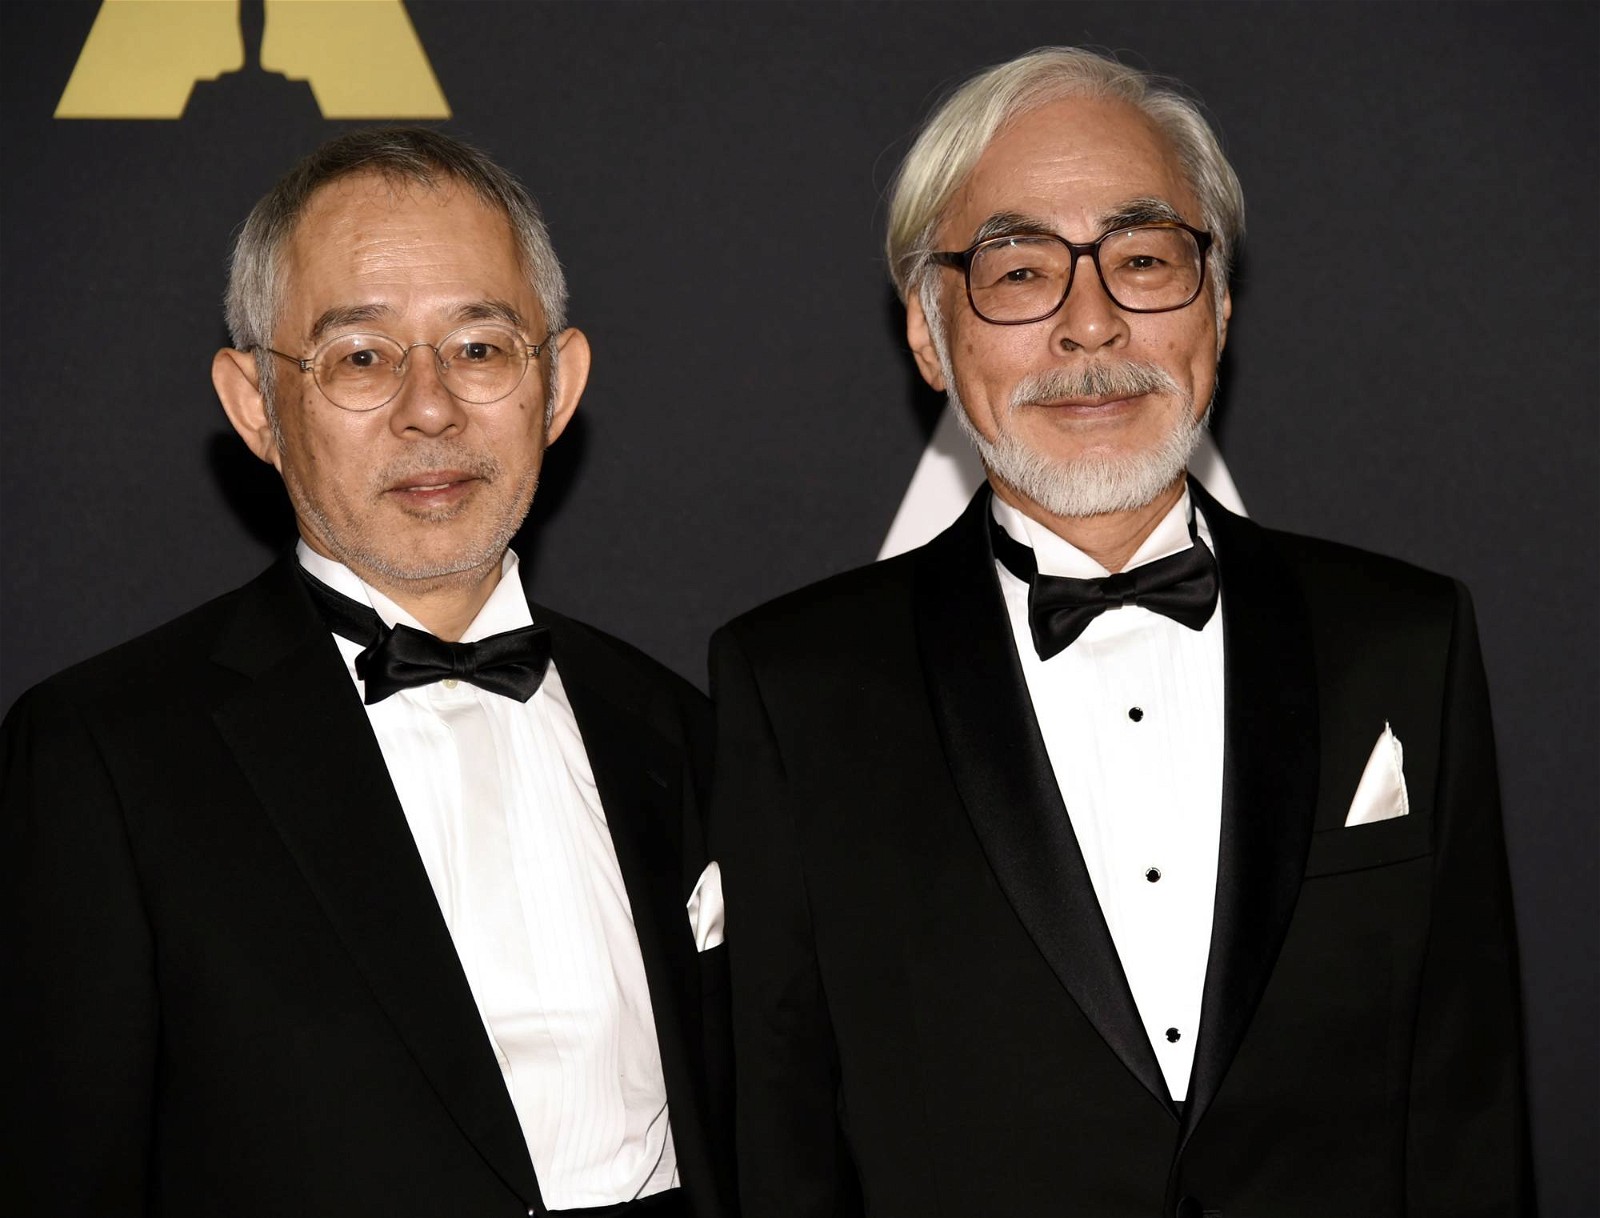 Hayao Miyazaki Net Worth - How Much Money Does the Godfather of Anime Have?